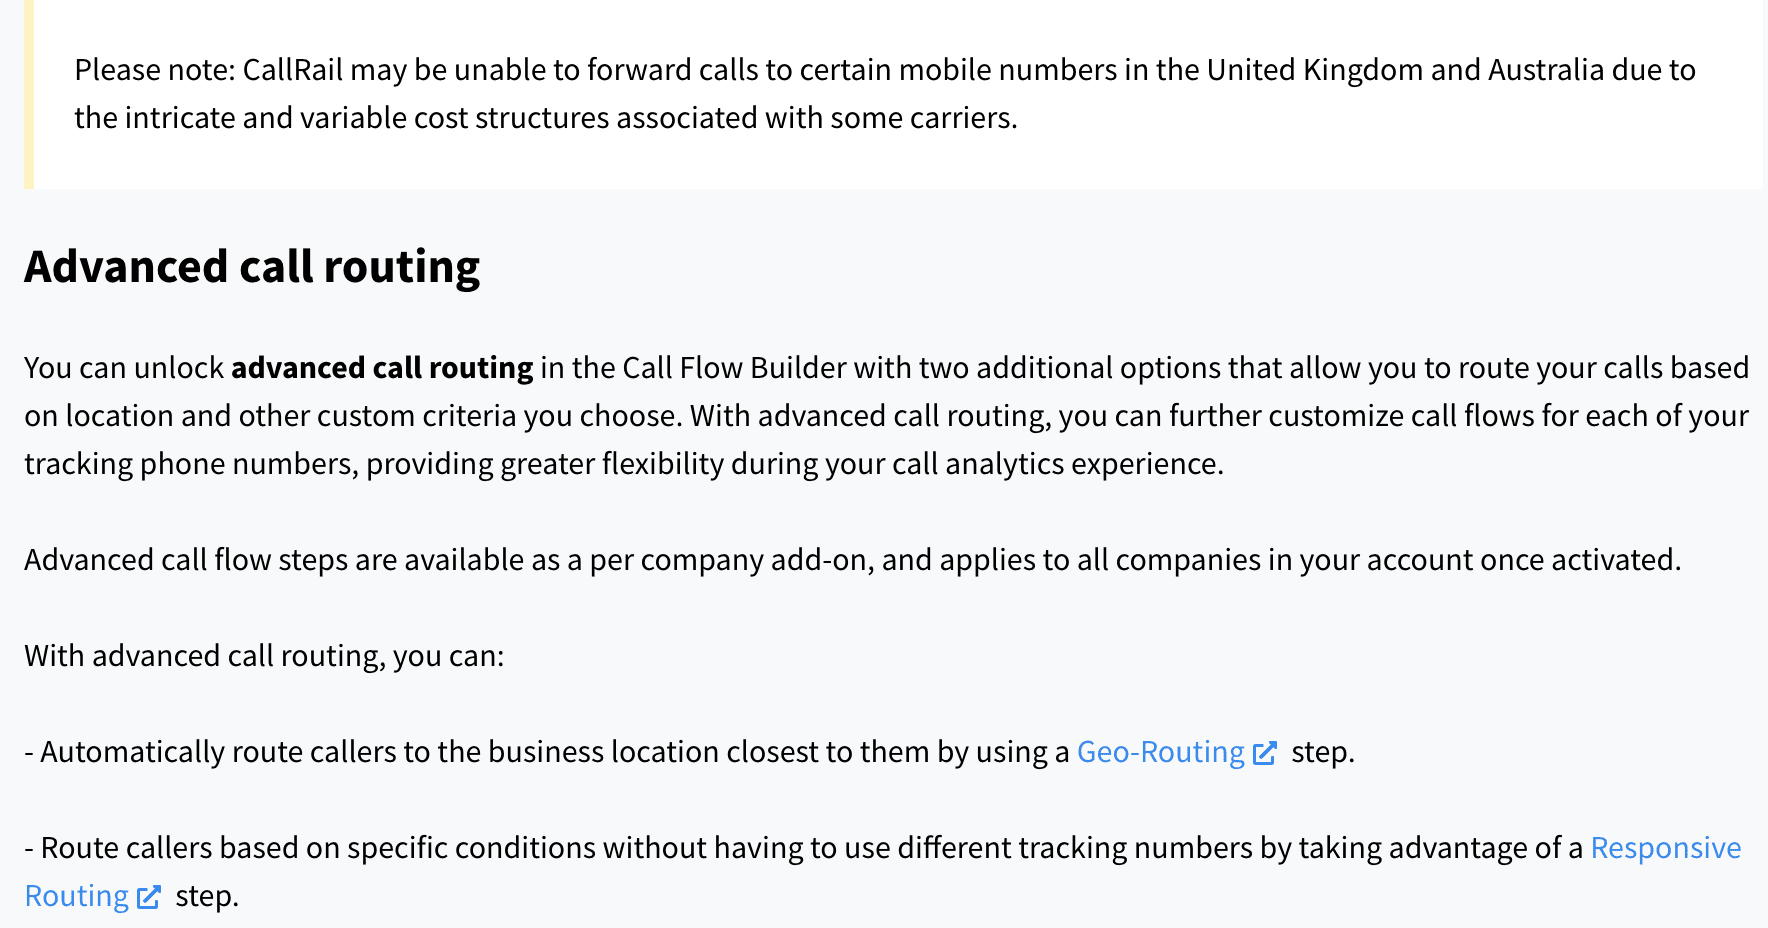 callrail call tracking flow steps